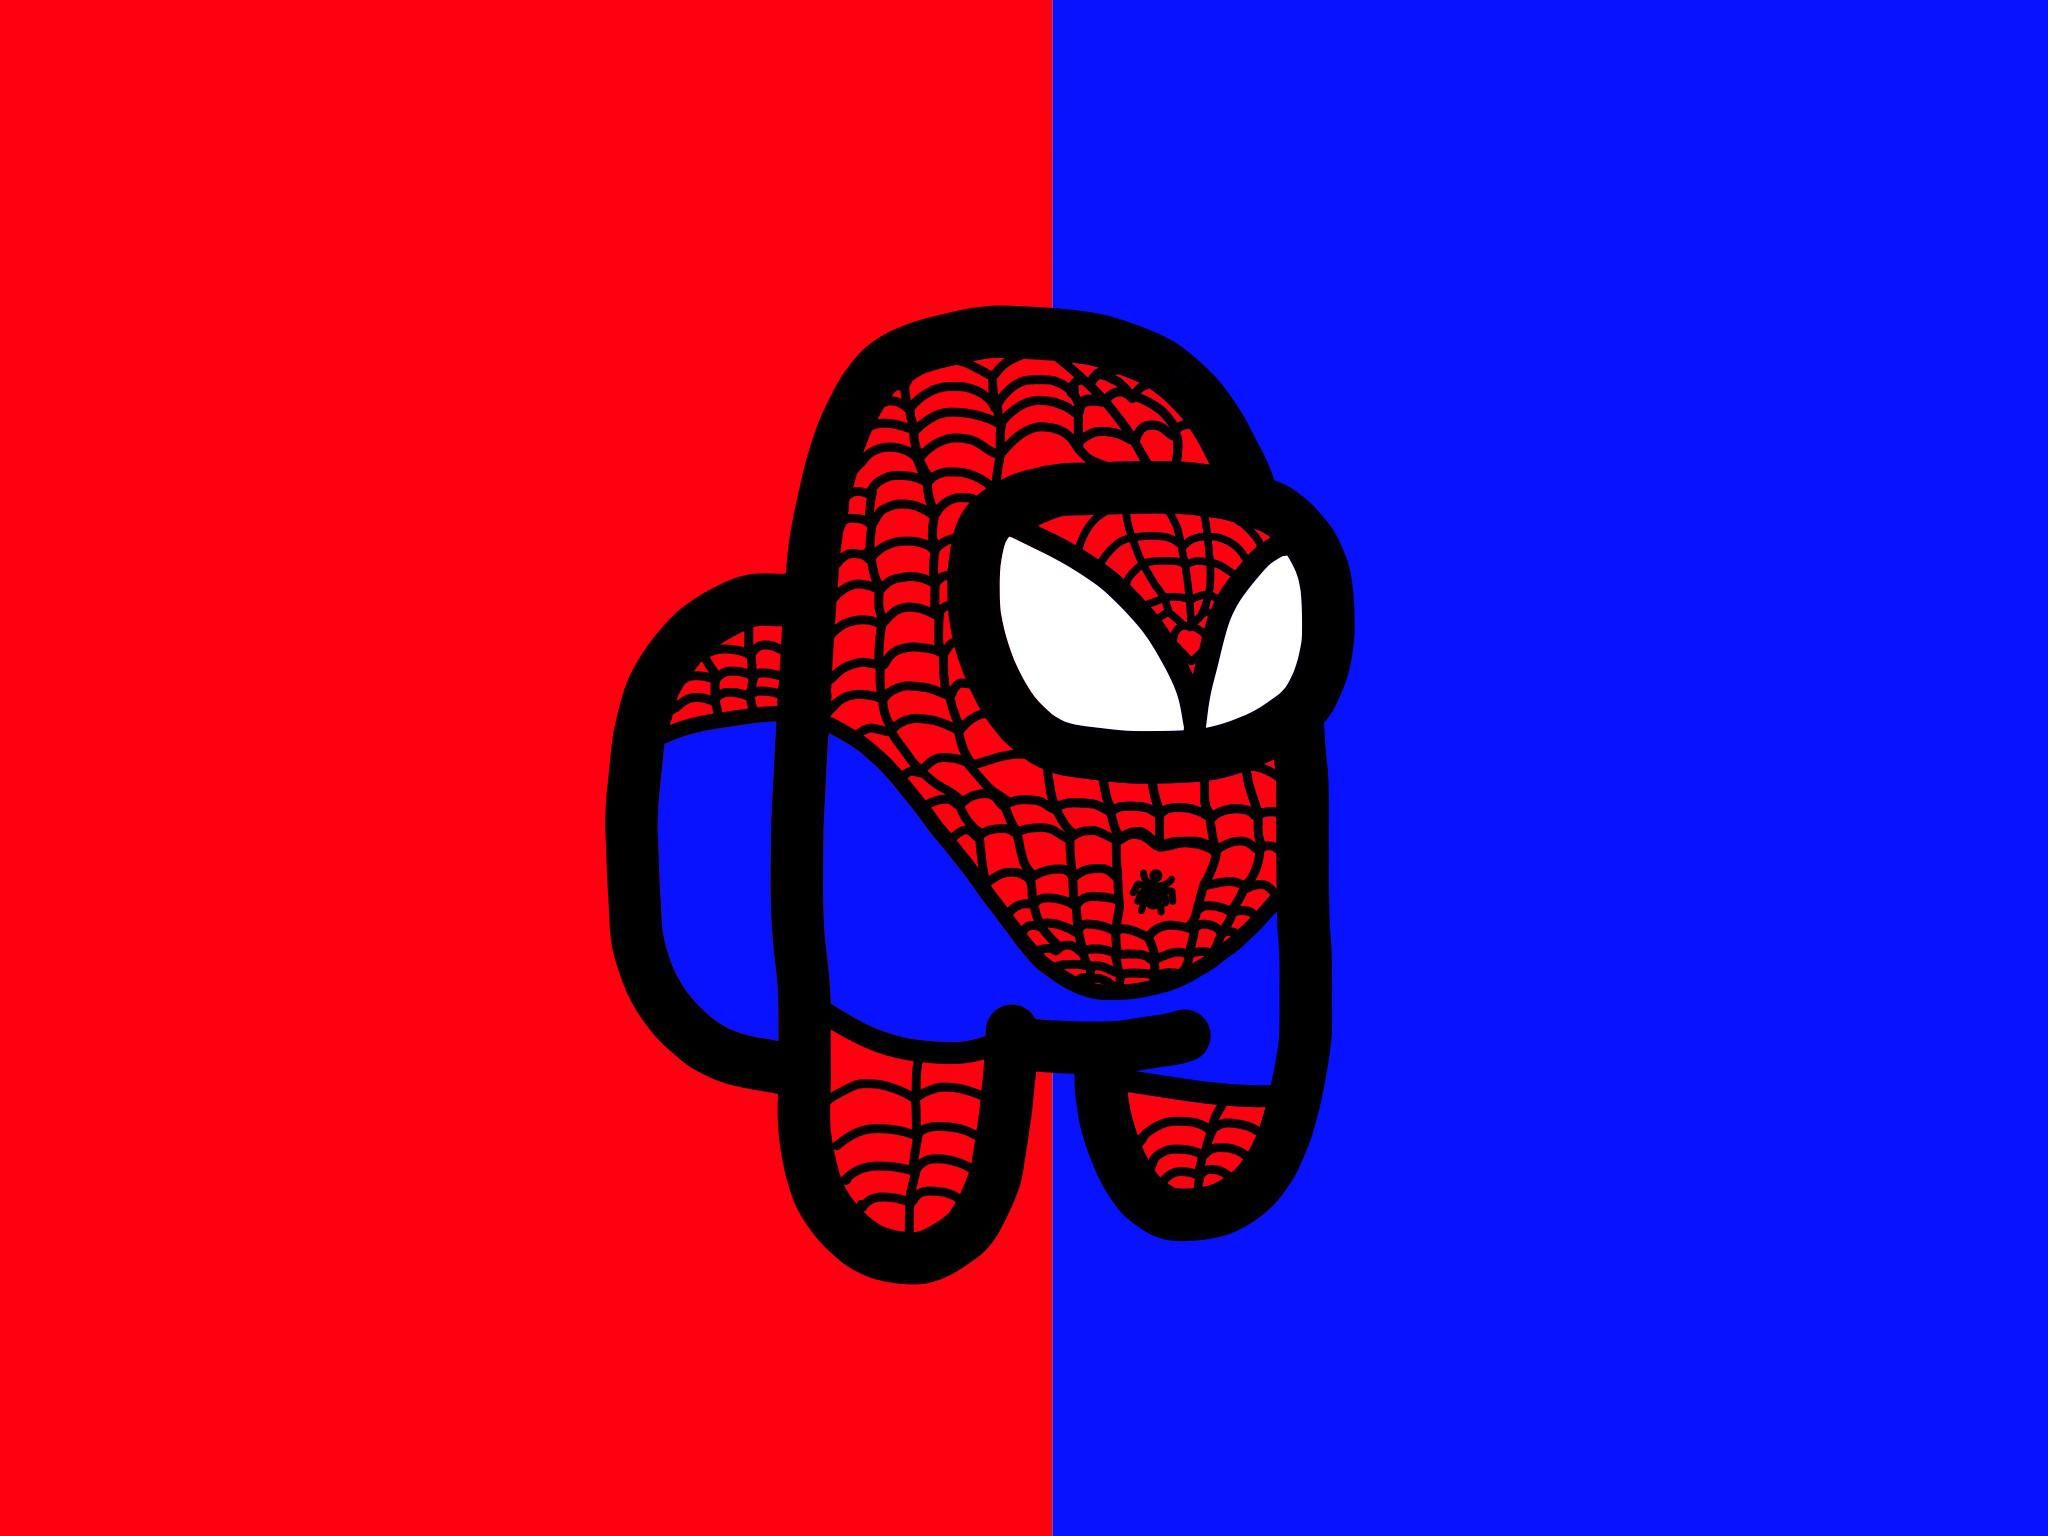 Spider Man Among Us Skin Concept ThorGift.com You Like It Please Buy Some From ThorGift.com. Spiderman, Aesthetic Iphone Wallpaper, Spider